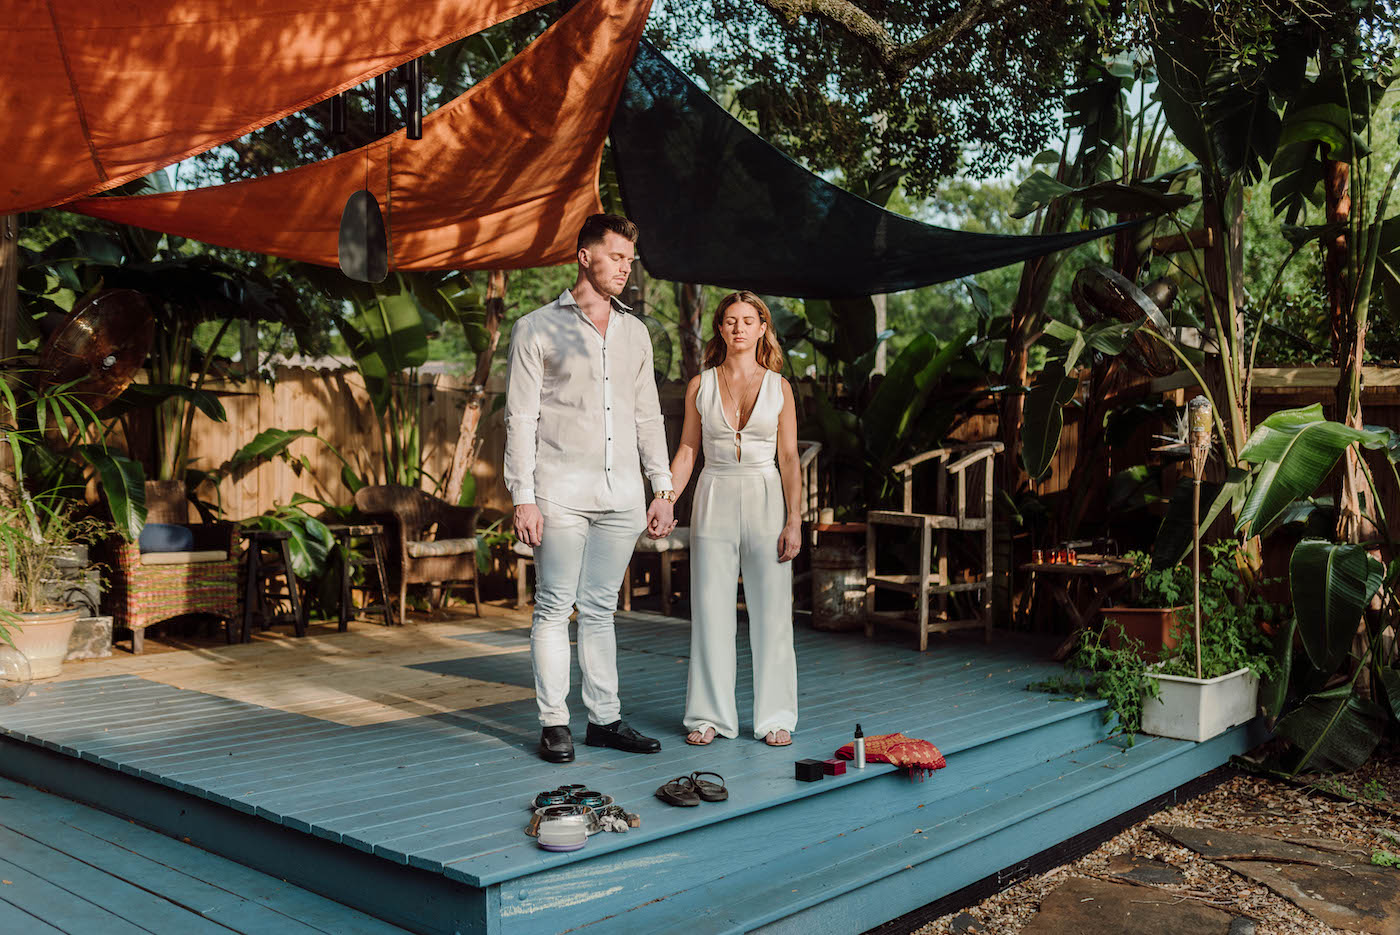 Bride and Groom Outdoor Wedding Portrait | COVID Wedding Elopement Backyard Ceremony | Ivory White Bridal Jumpsuit | Casual Groom White Shirt and Pants